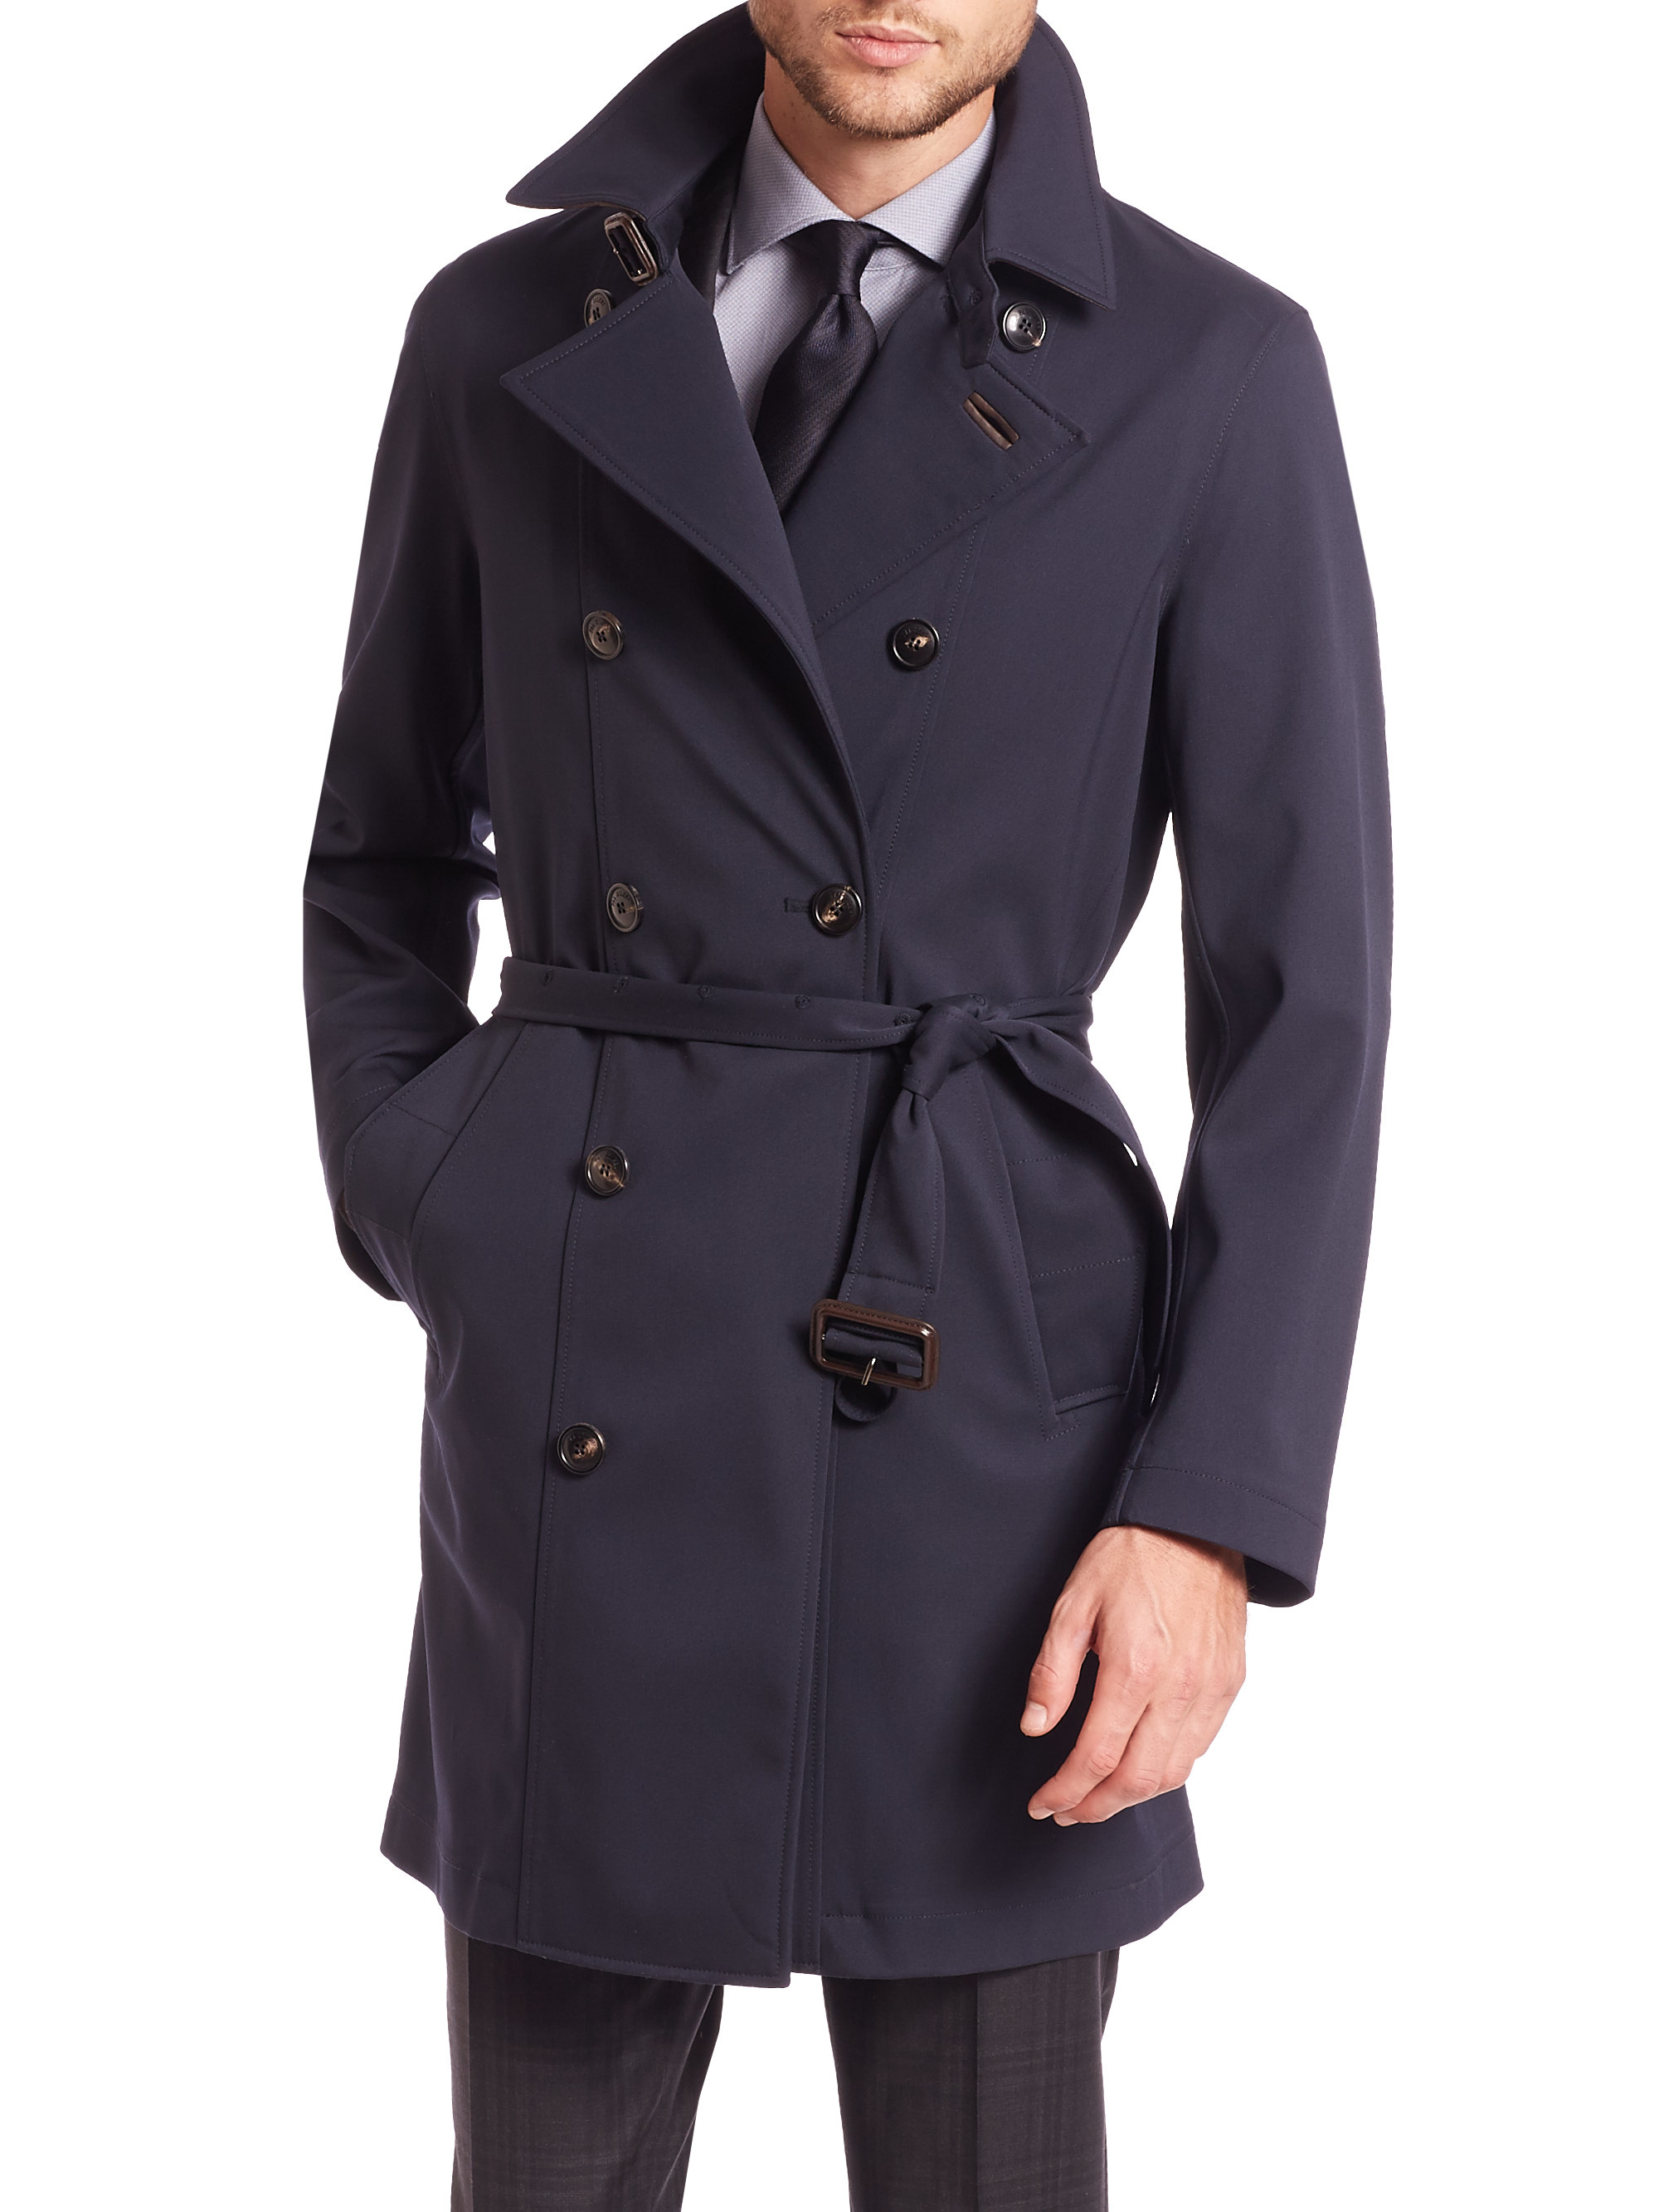 Pal Zileri Canvas Double-breasted Car Coat in Blue for Men - Lyst